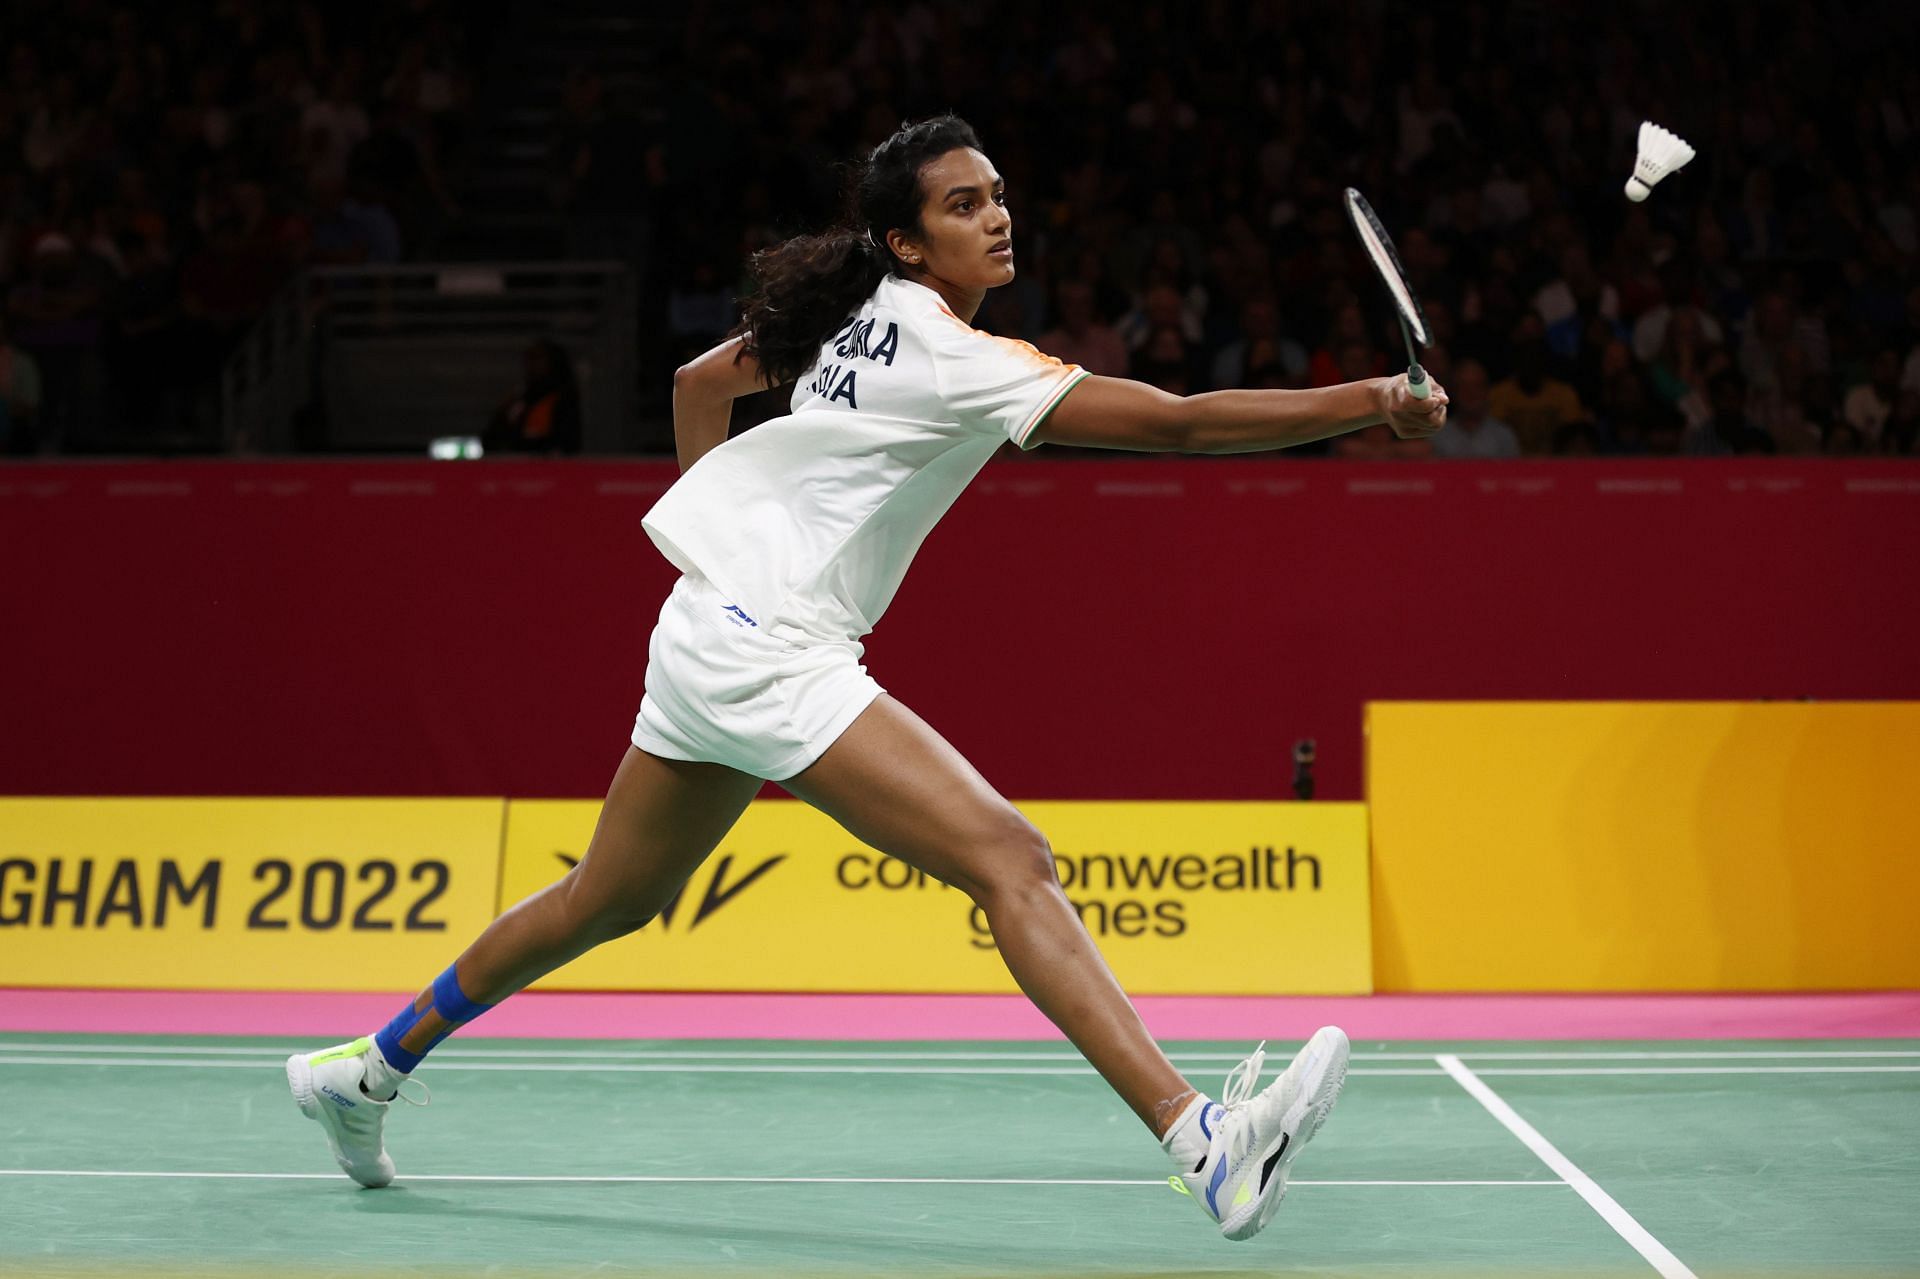 Swiss Open 2023 PV Sindhu vs Putri Kusuma Wardani preview, head-to-head, prediction, where to watch and live streaming details